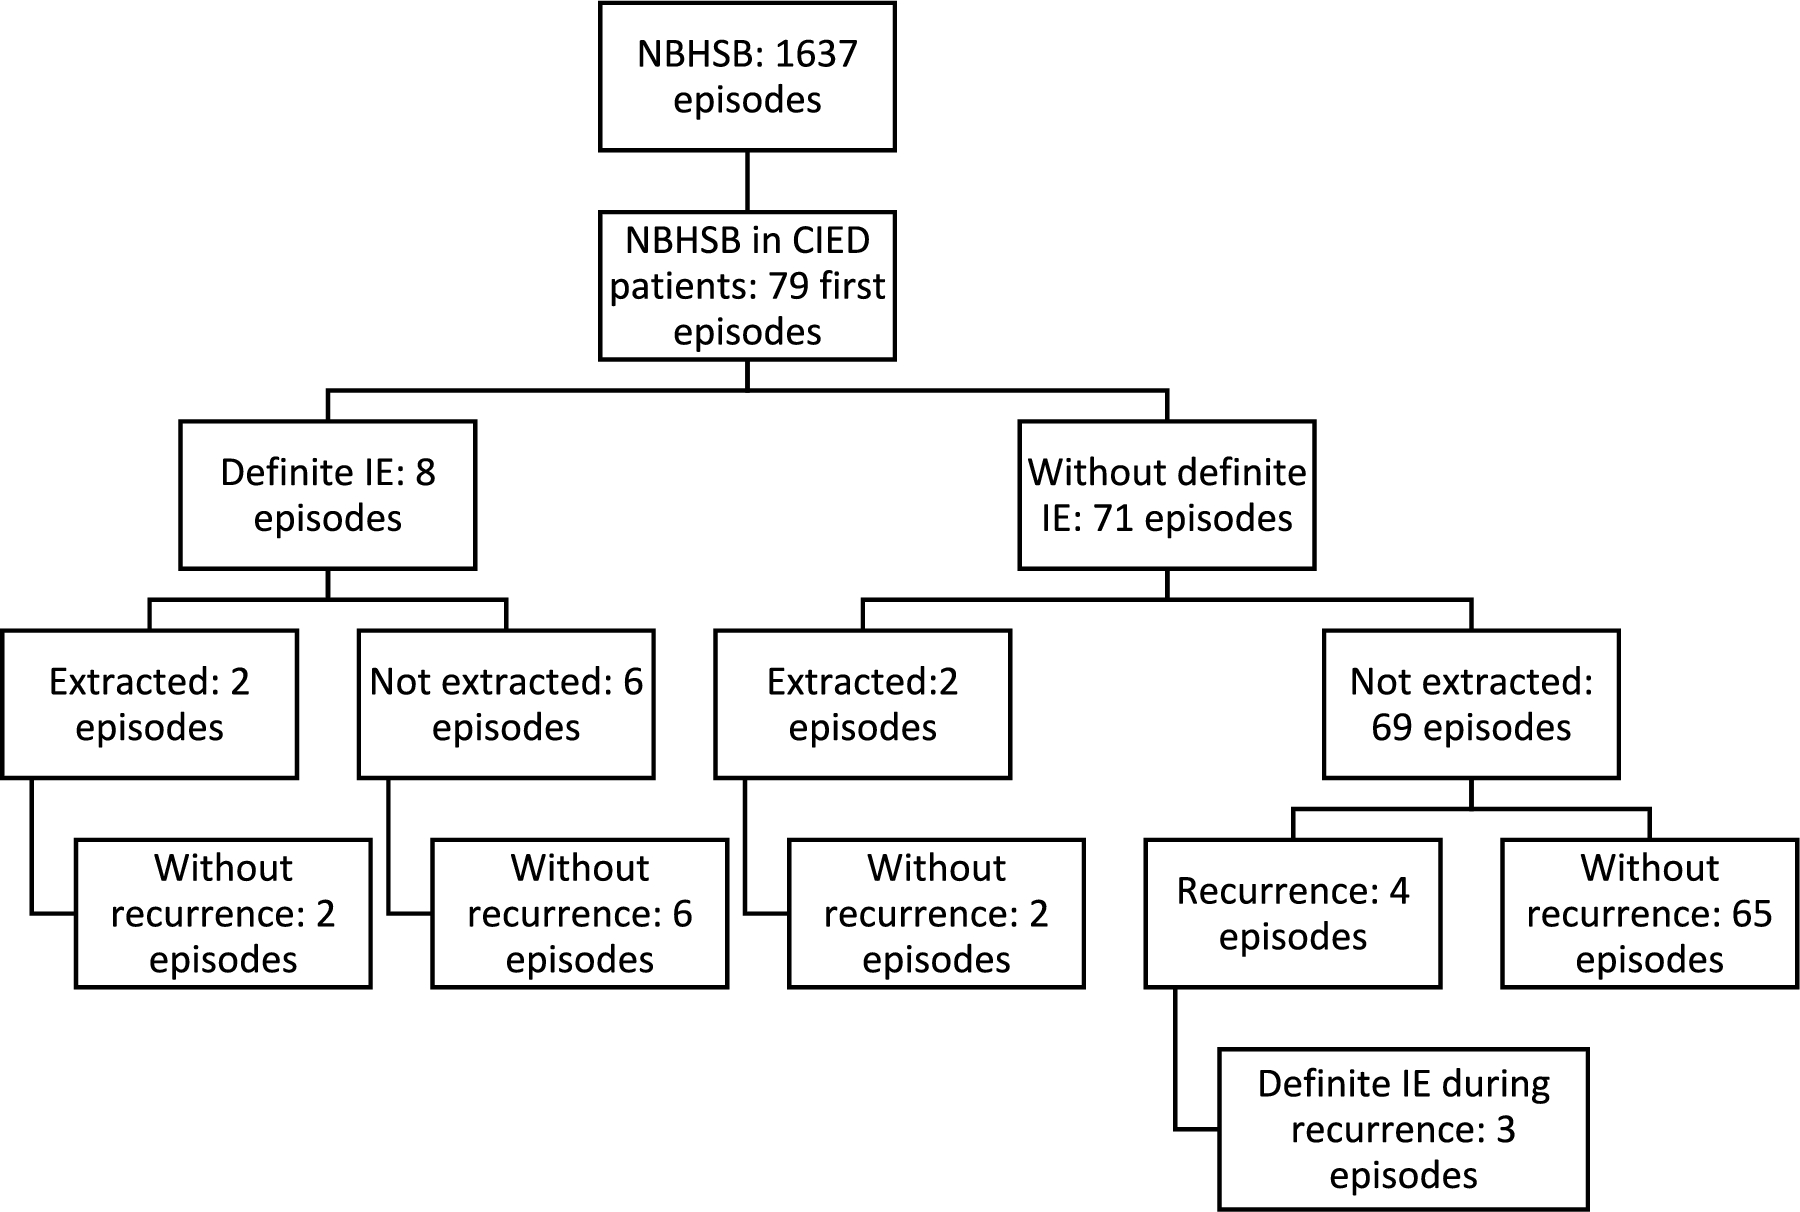 Non-betahemolytic streptococcal bacteremia, cardiac implantable electronic device, endocarditis, extraction, and outcome; a population-based retrospective cohort study